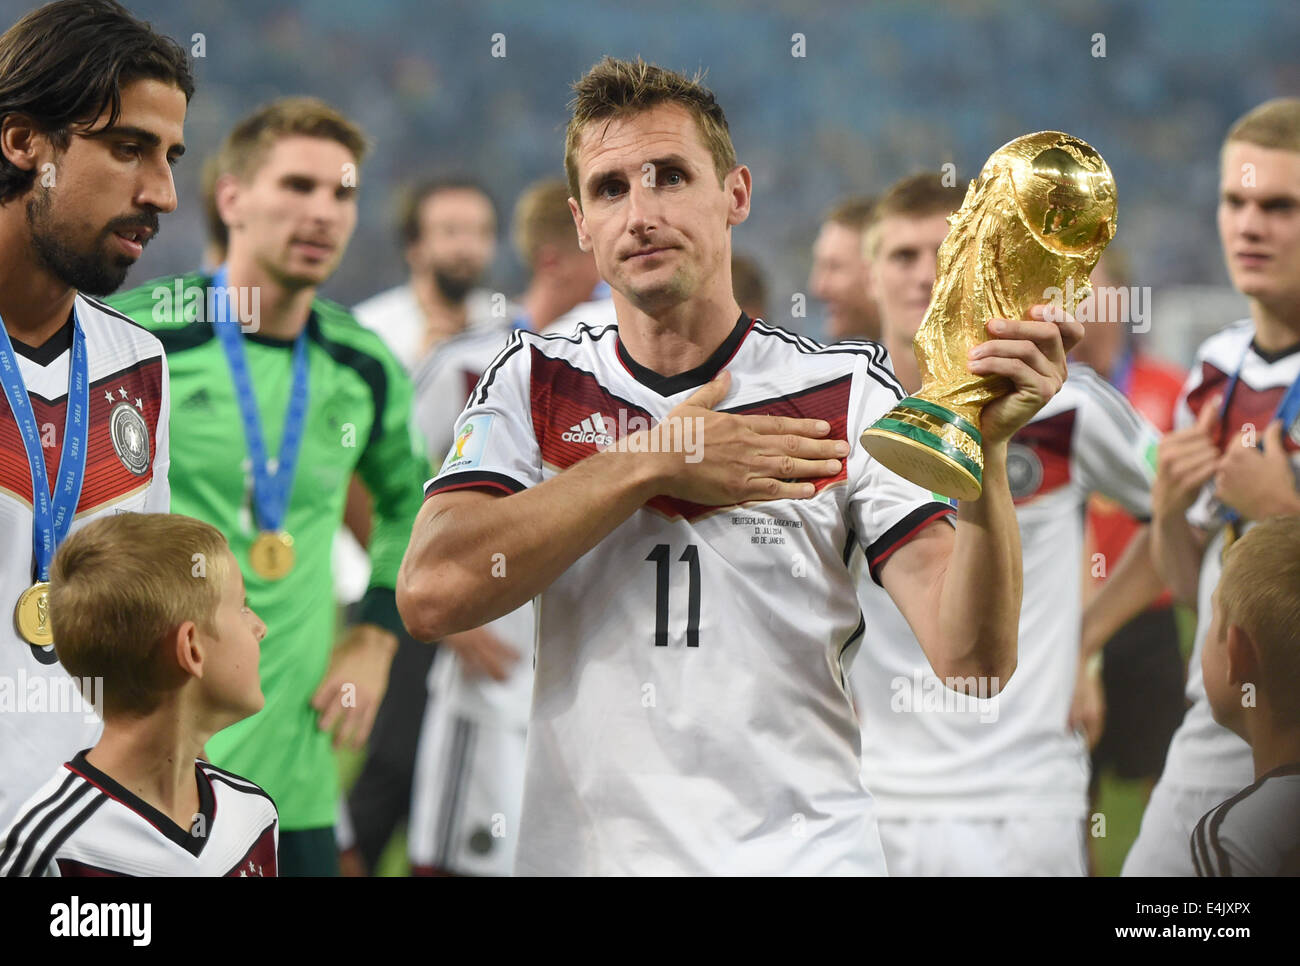 Rio de Janeiro, Brazil. 13th July, 2014. Miroslav Klose of Germany poses with the World Cup trophy and holds the hand on his heart after winning the FIFA World Cup 2014 final soccer match between Germany and Argentina at the Estadio do Maracana in Rio de Janeiro, Brazil, 13 July 2014. Photo: Marcus Brandt/dpa/Alamy Live News Stock Photo